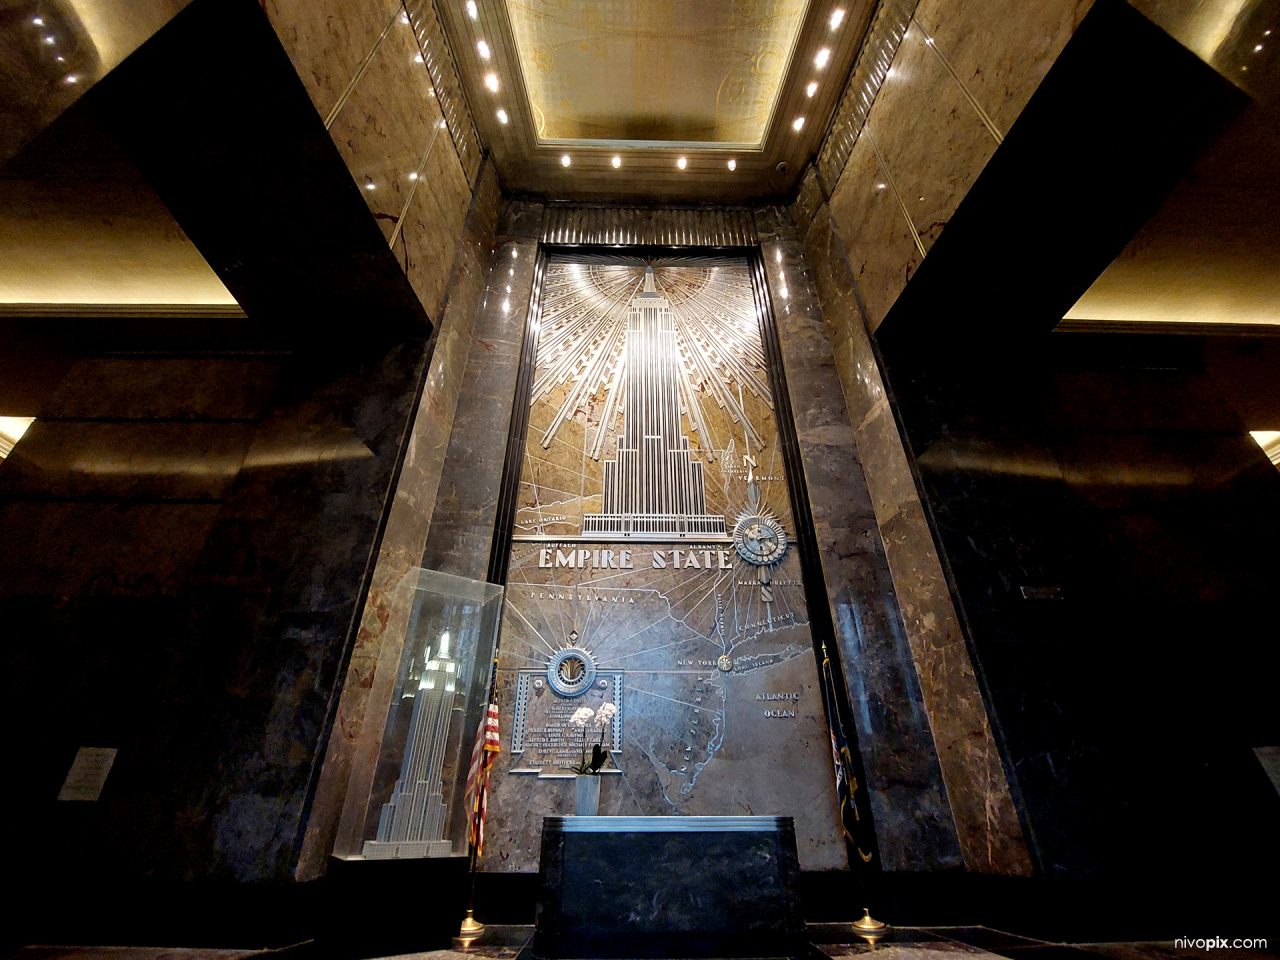 The Empire State Building's Art Deco Lobby